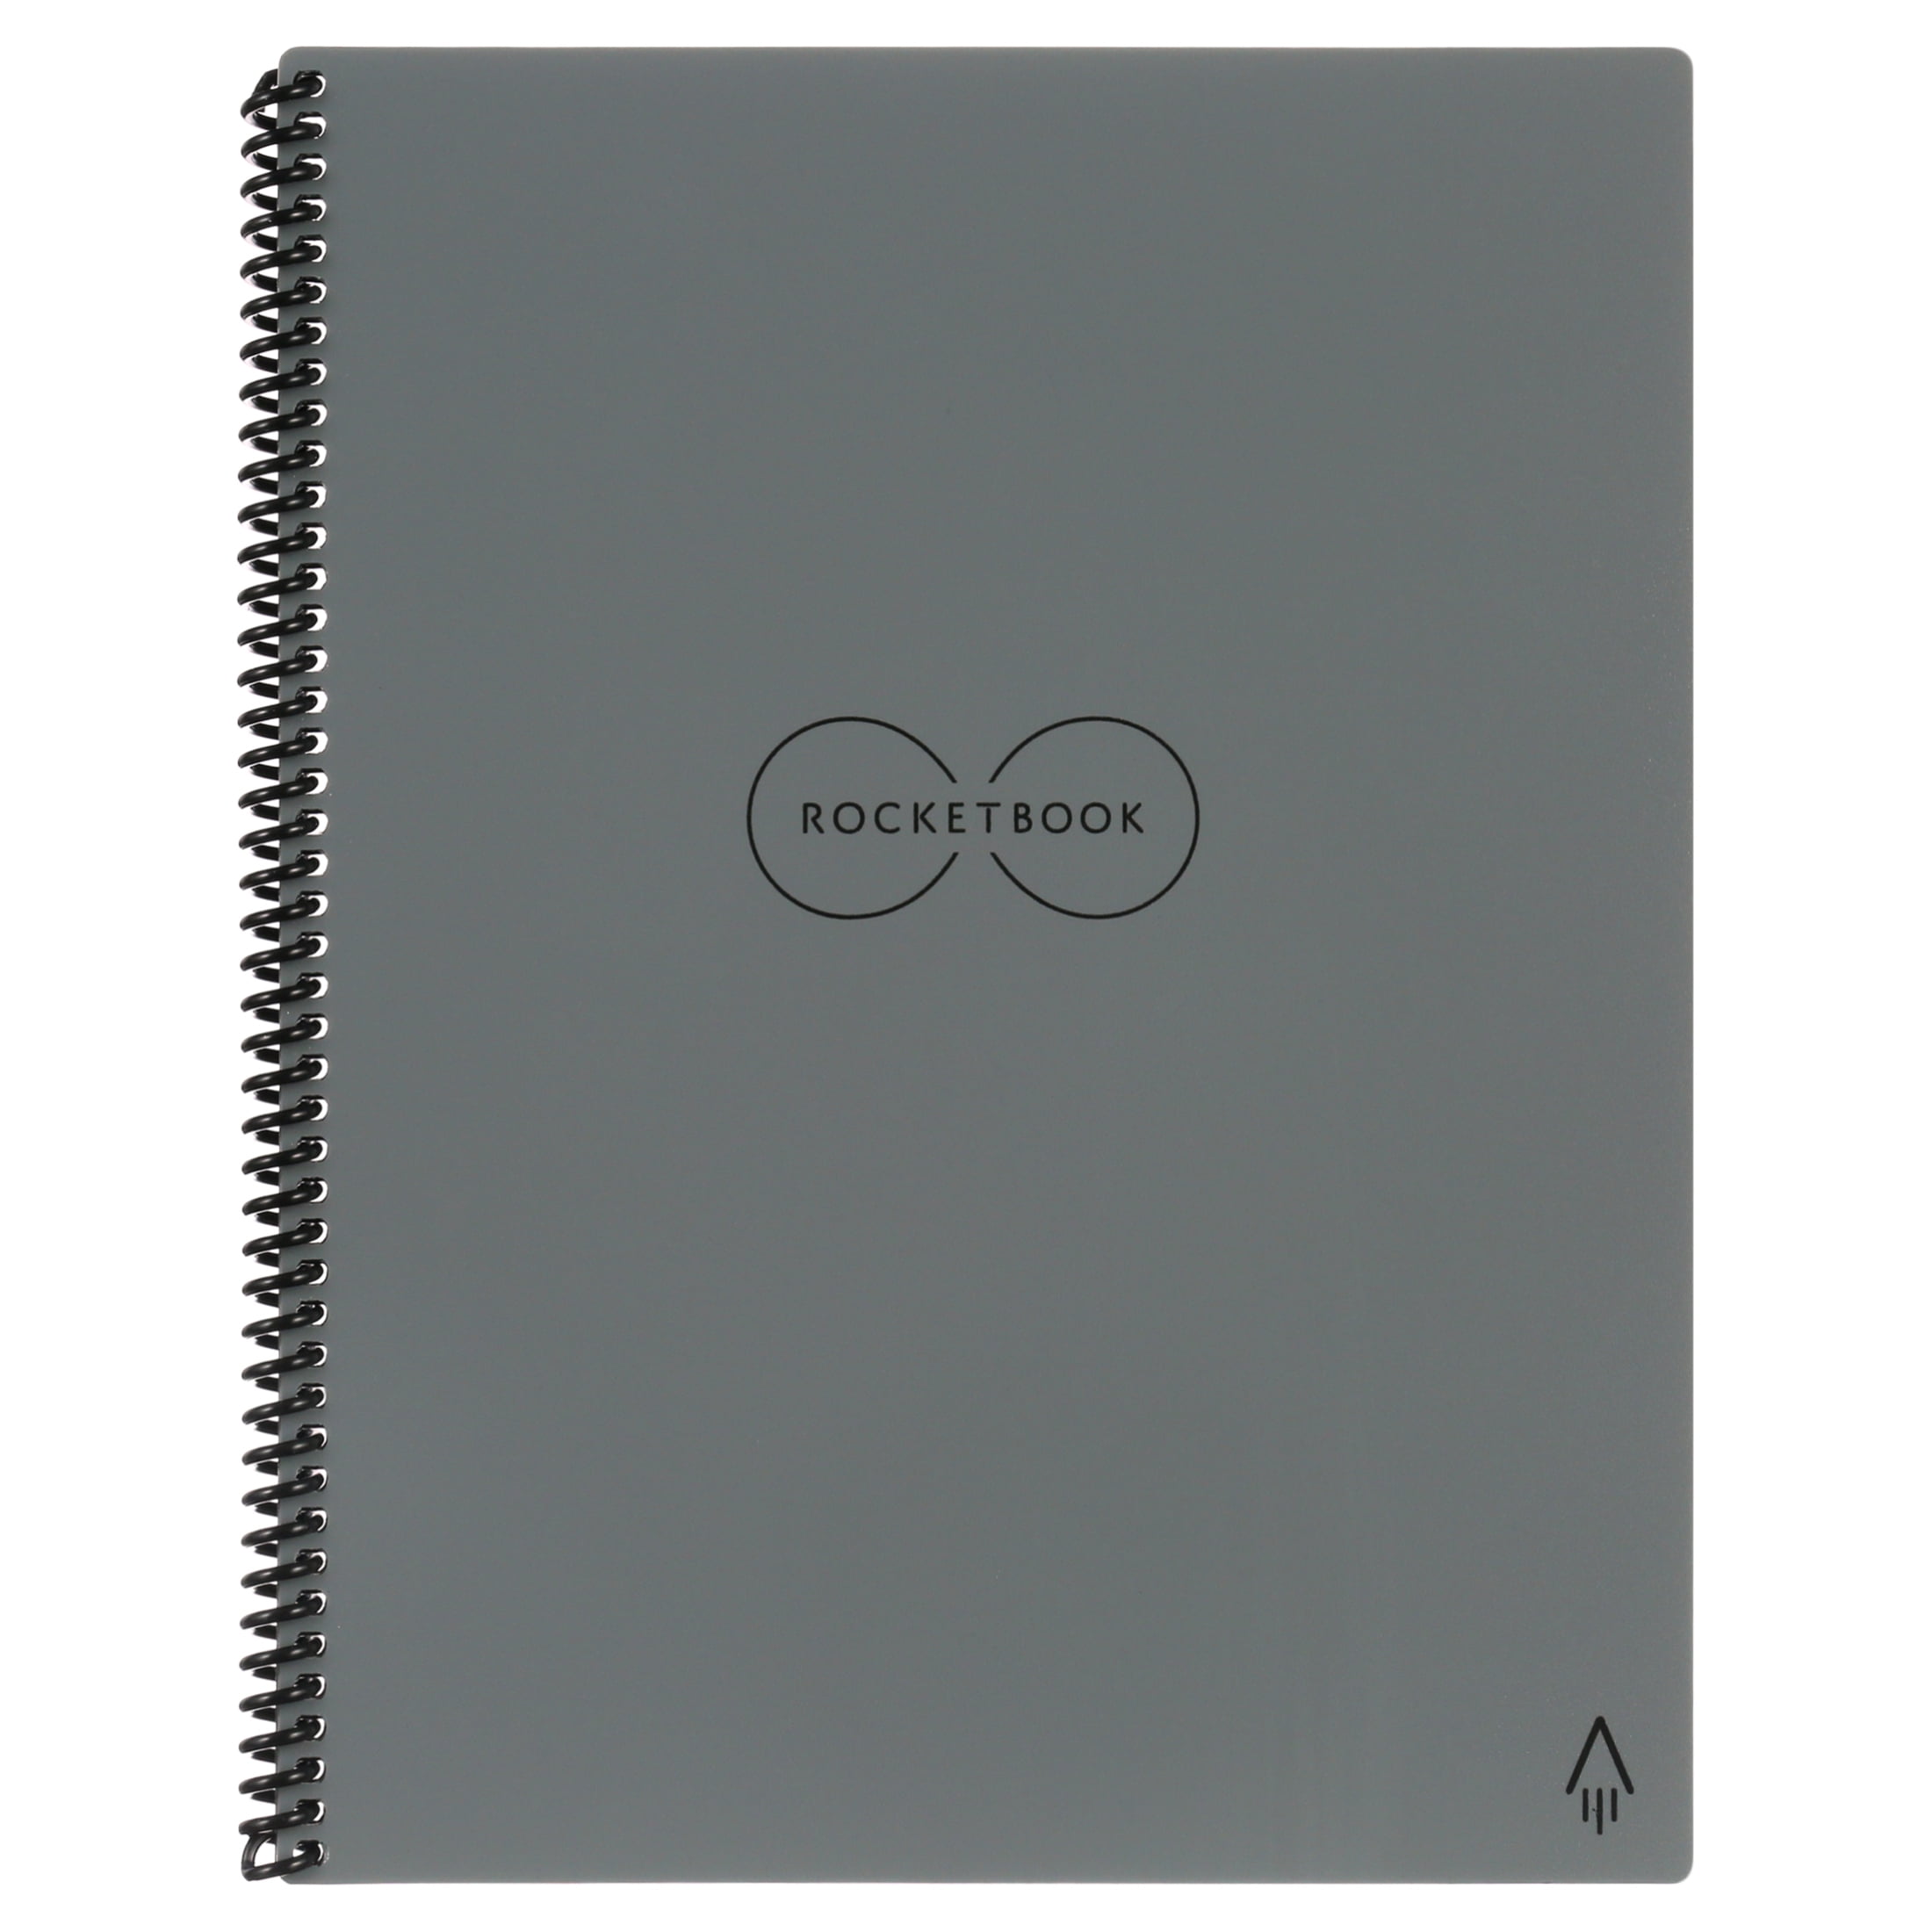 Rocketbook Core Reusable Smart Notebook | Innovative, Eco-Friendly,  Digitally Connected Notebook with Cloud Sharing Capabilities | Lined, 8.5  x 11